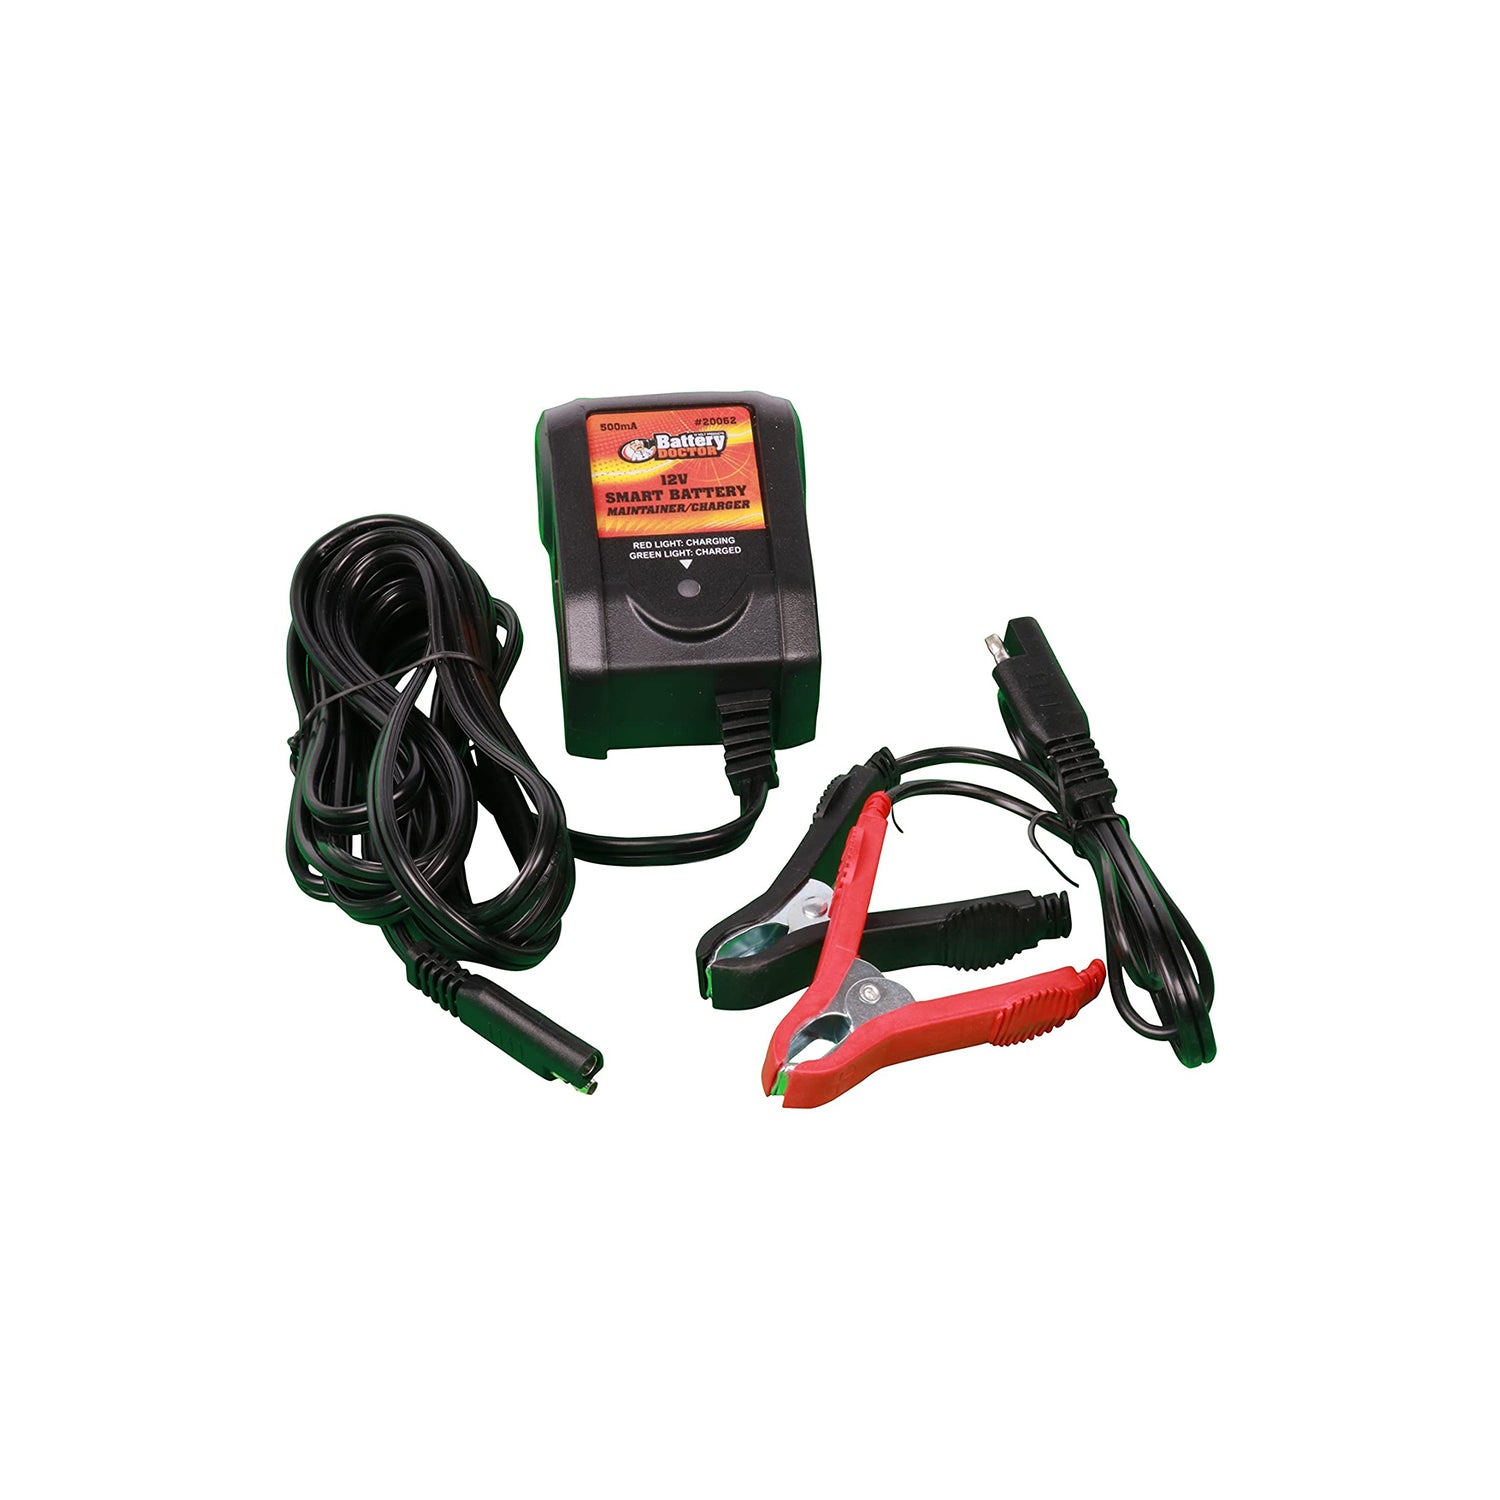 12V 500MA CEC BATTERY CHARGER MAINTAINER